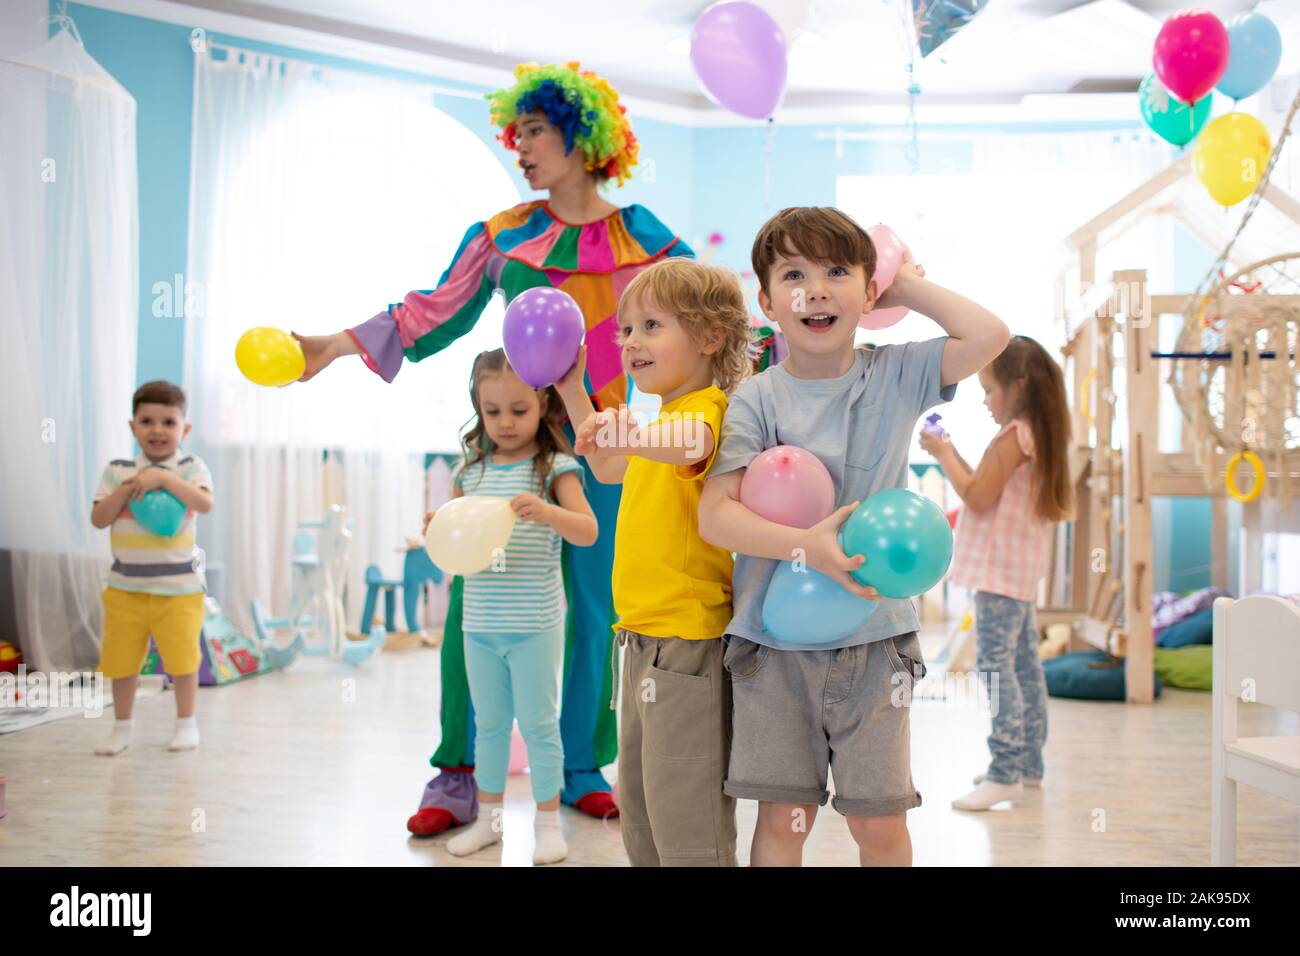 Clown entertains kids at children's party in club Stock Photo